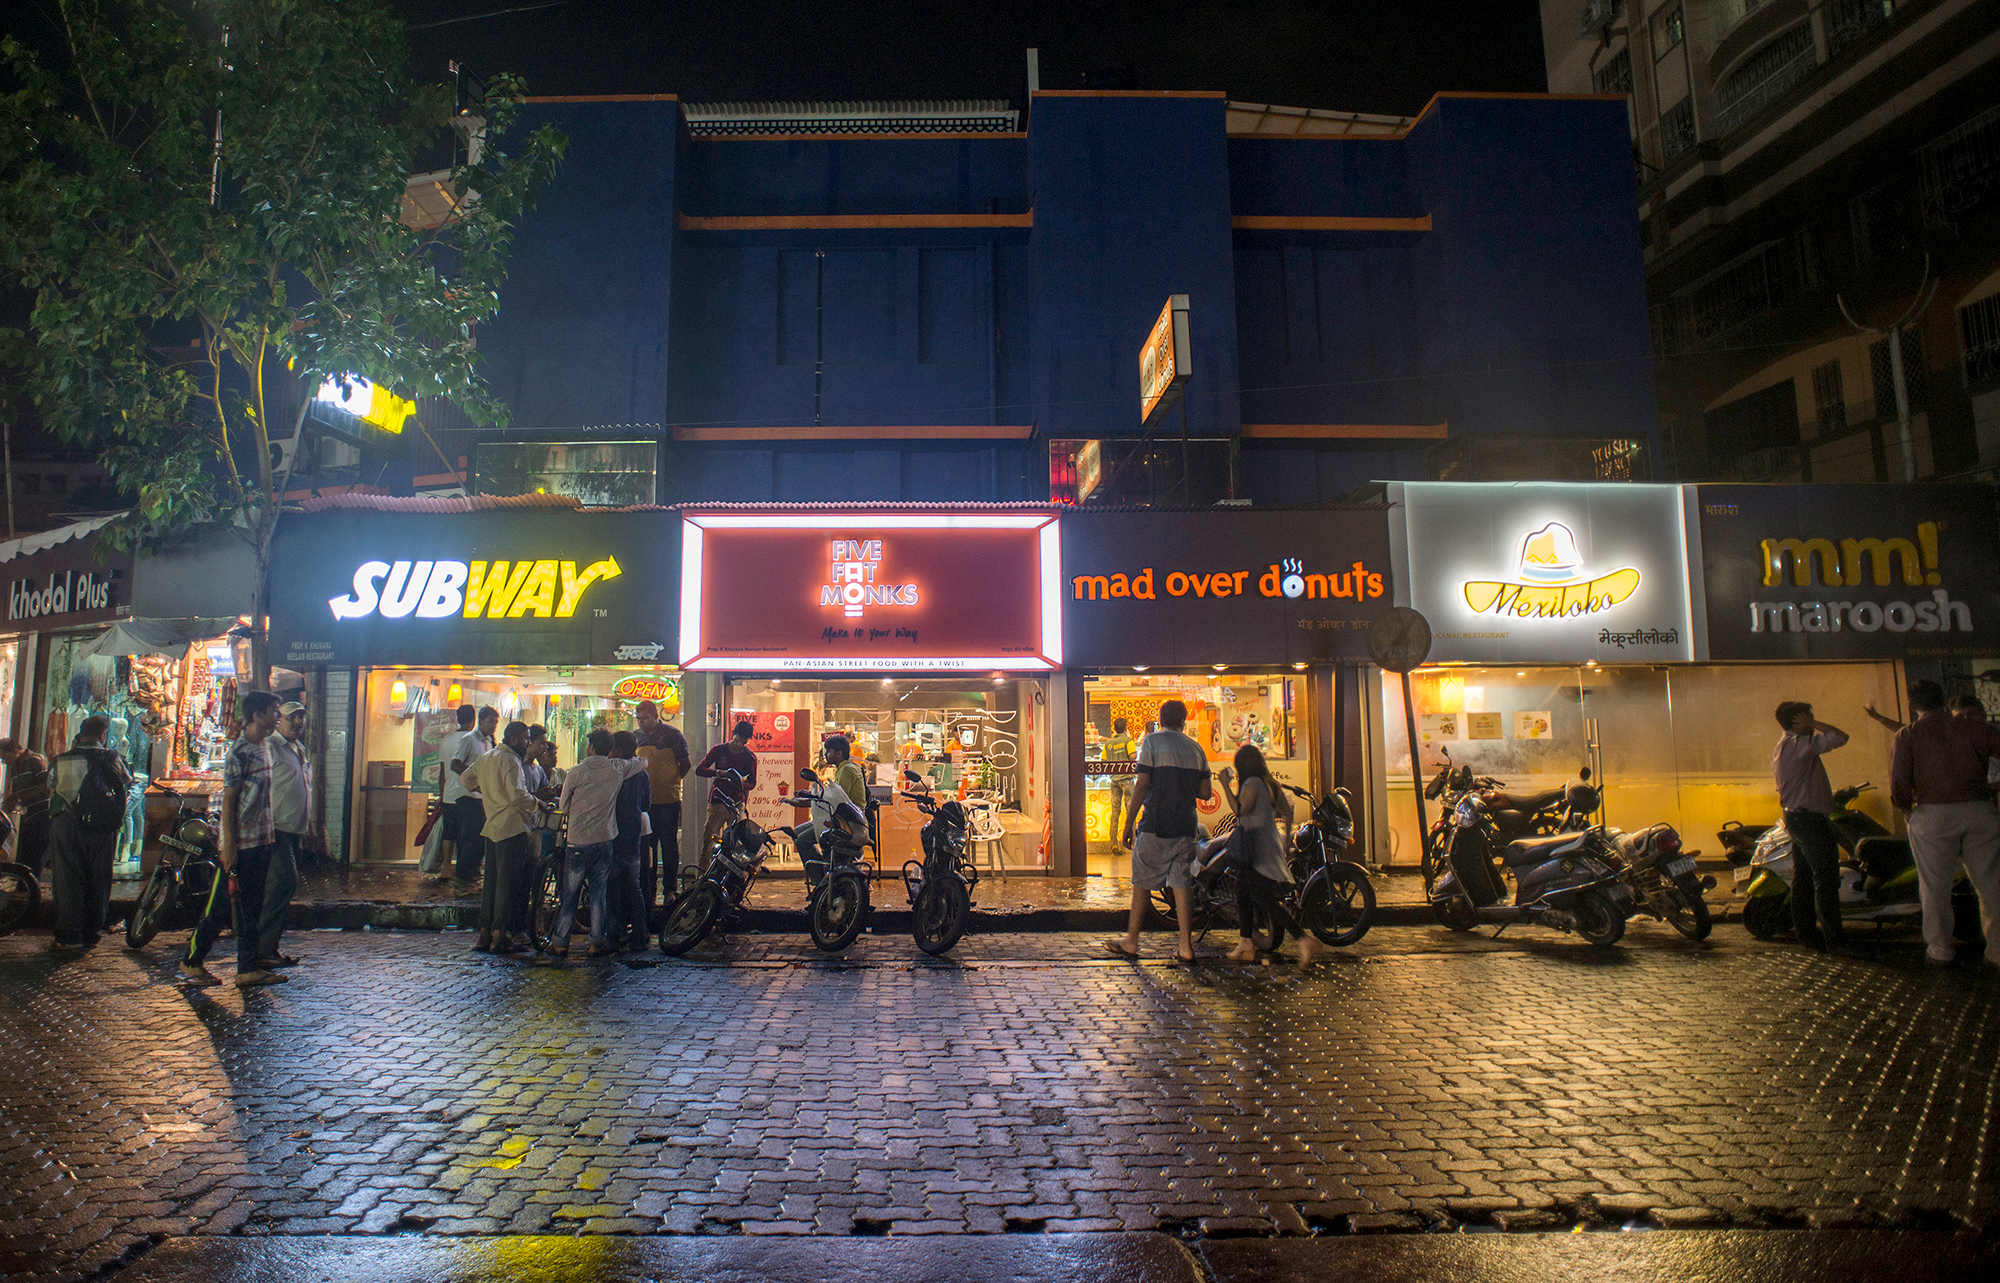 Pedestrians visit fast-food restaurants in Mumbai, India. Rapid urbanization in many developing countries is driving the demand for fast foods and highly processed, packaged foods.